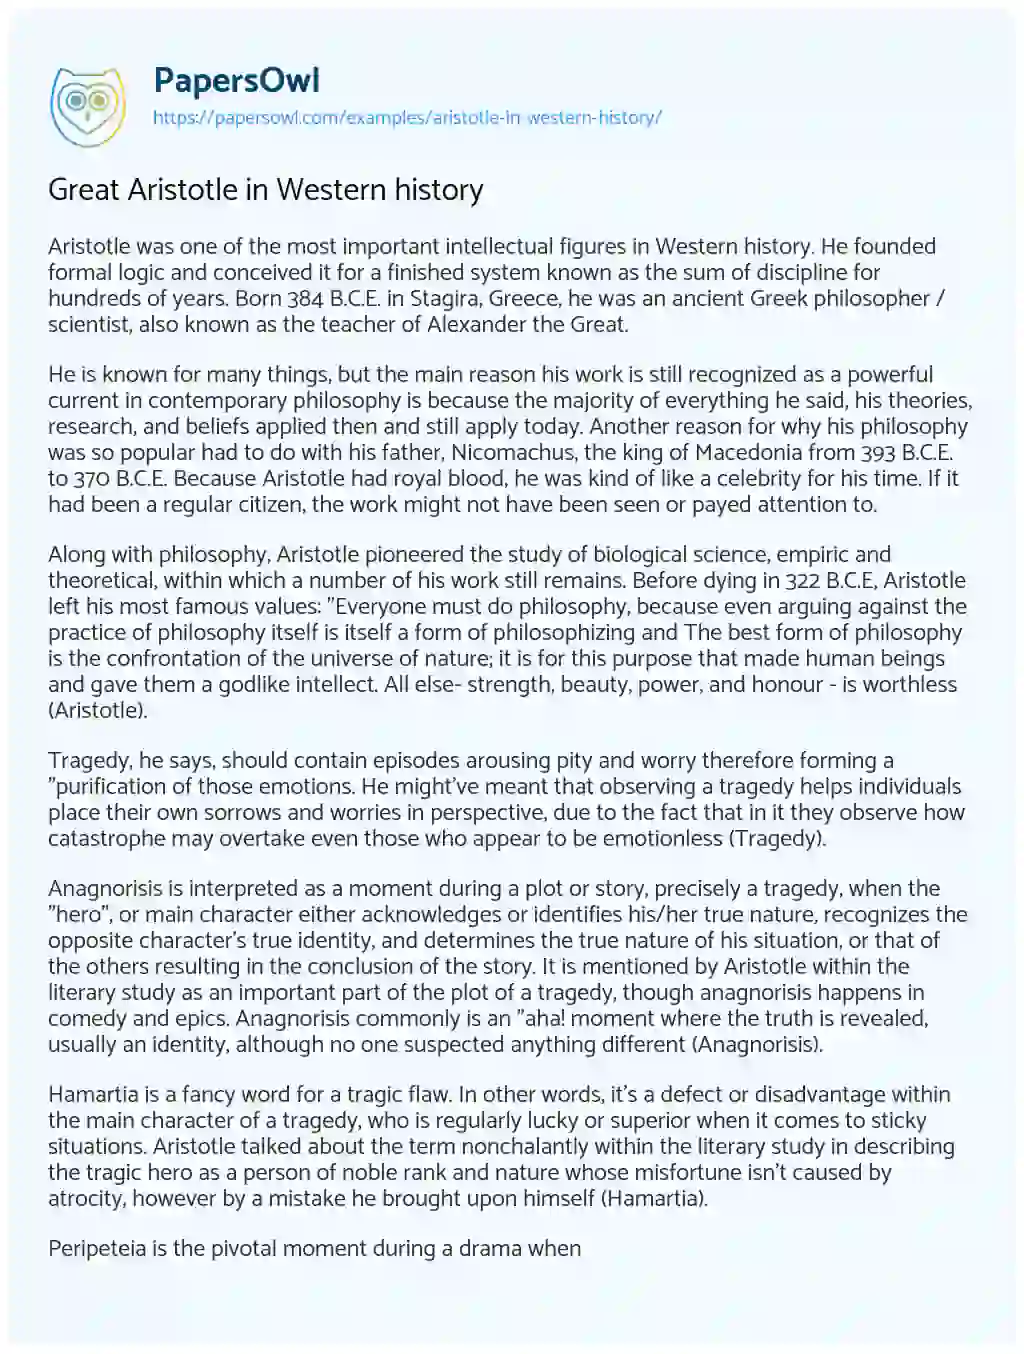 Essay on Great Aristotle in Western History